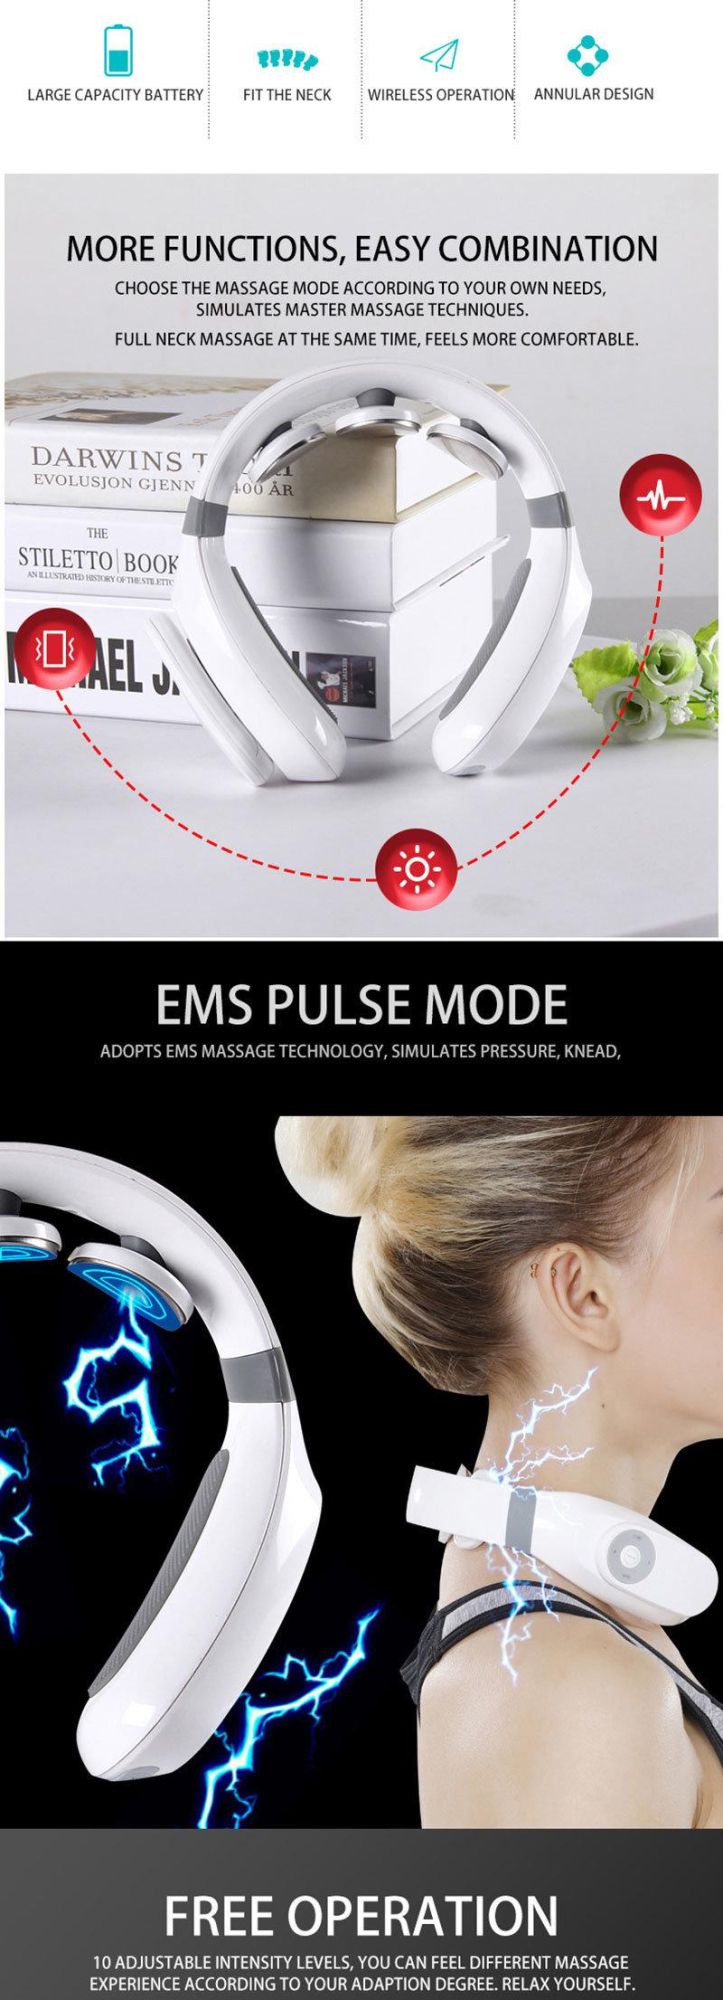 New Intelligent Wireless Portable 4D Shoulder and Neck Massage Equipment for Office, Home, Sport, Travel